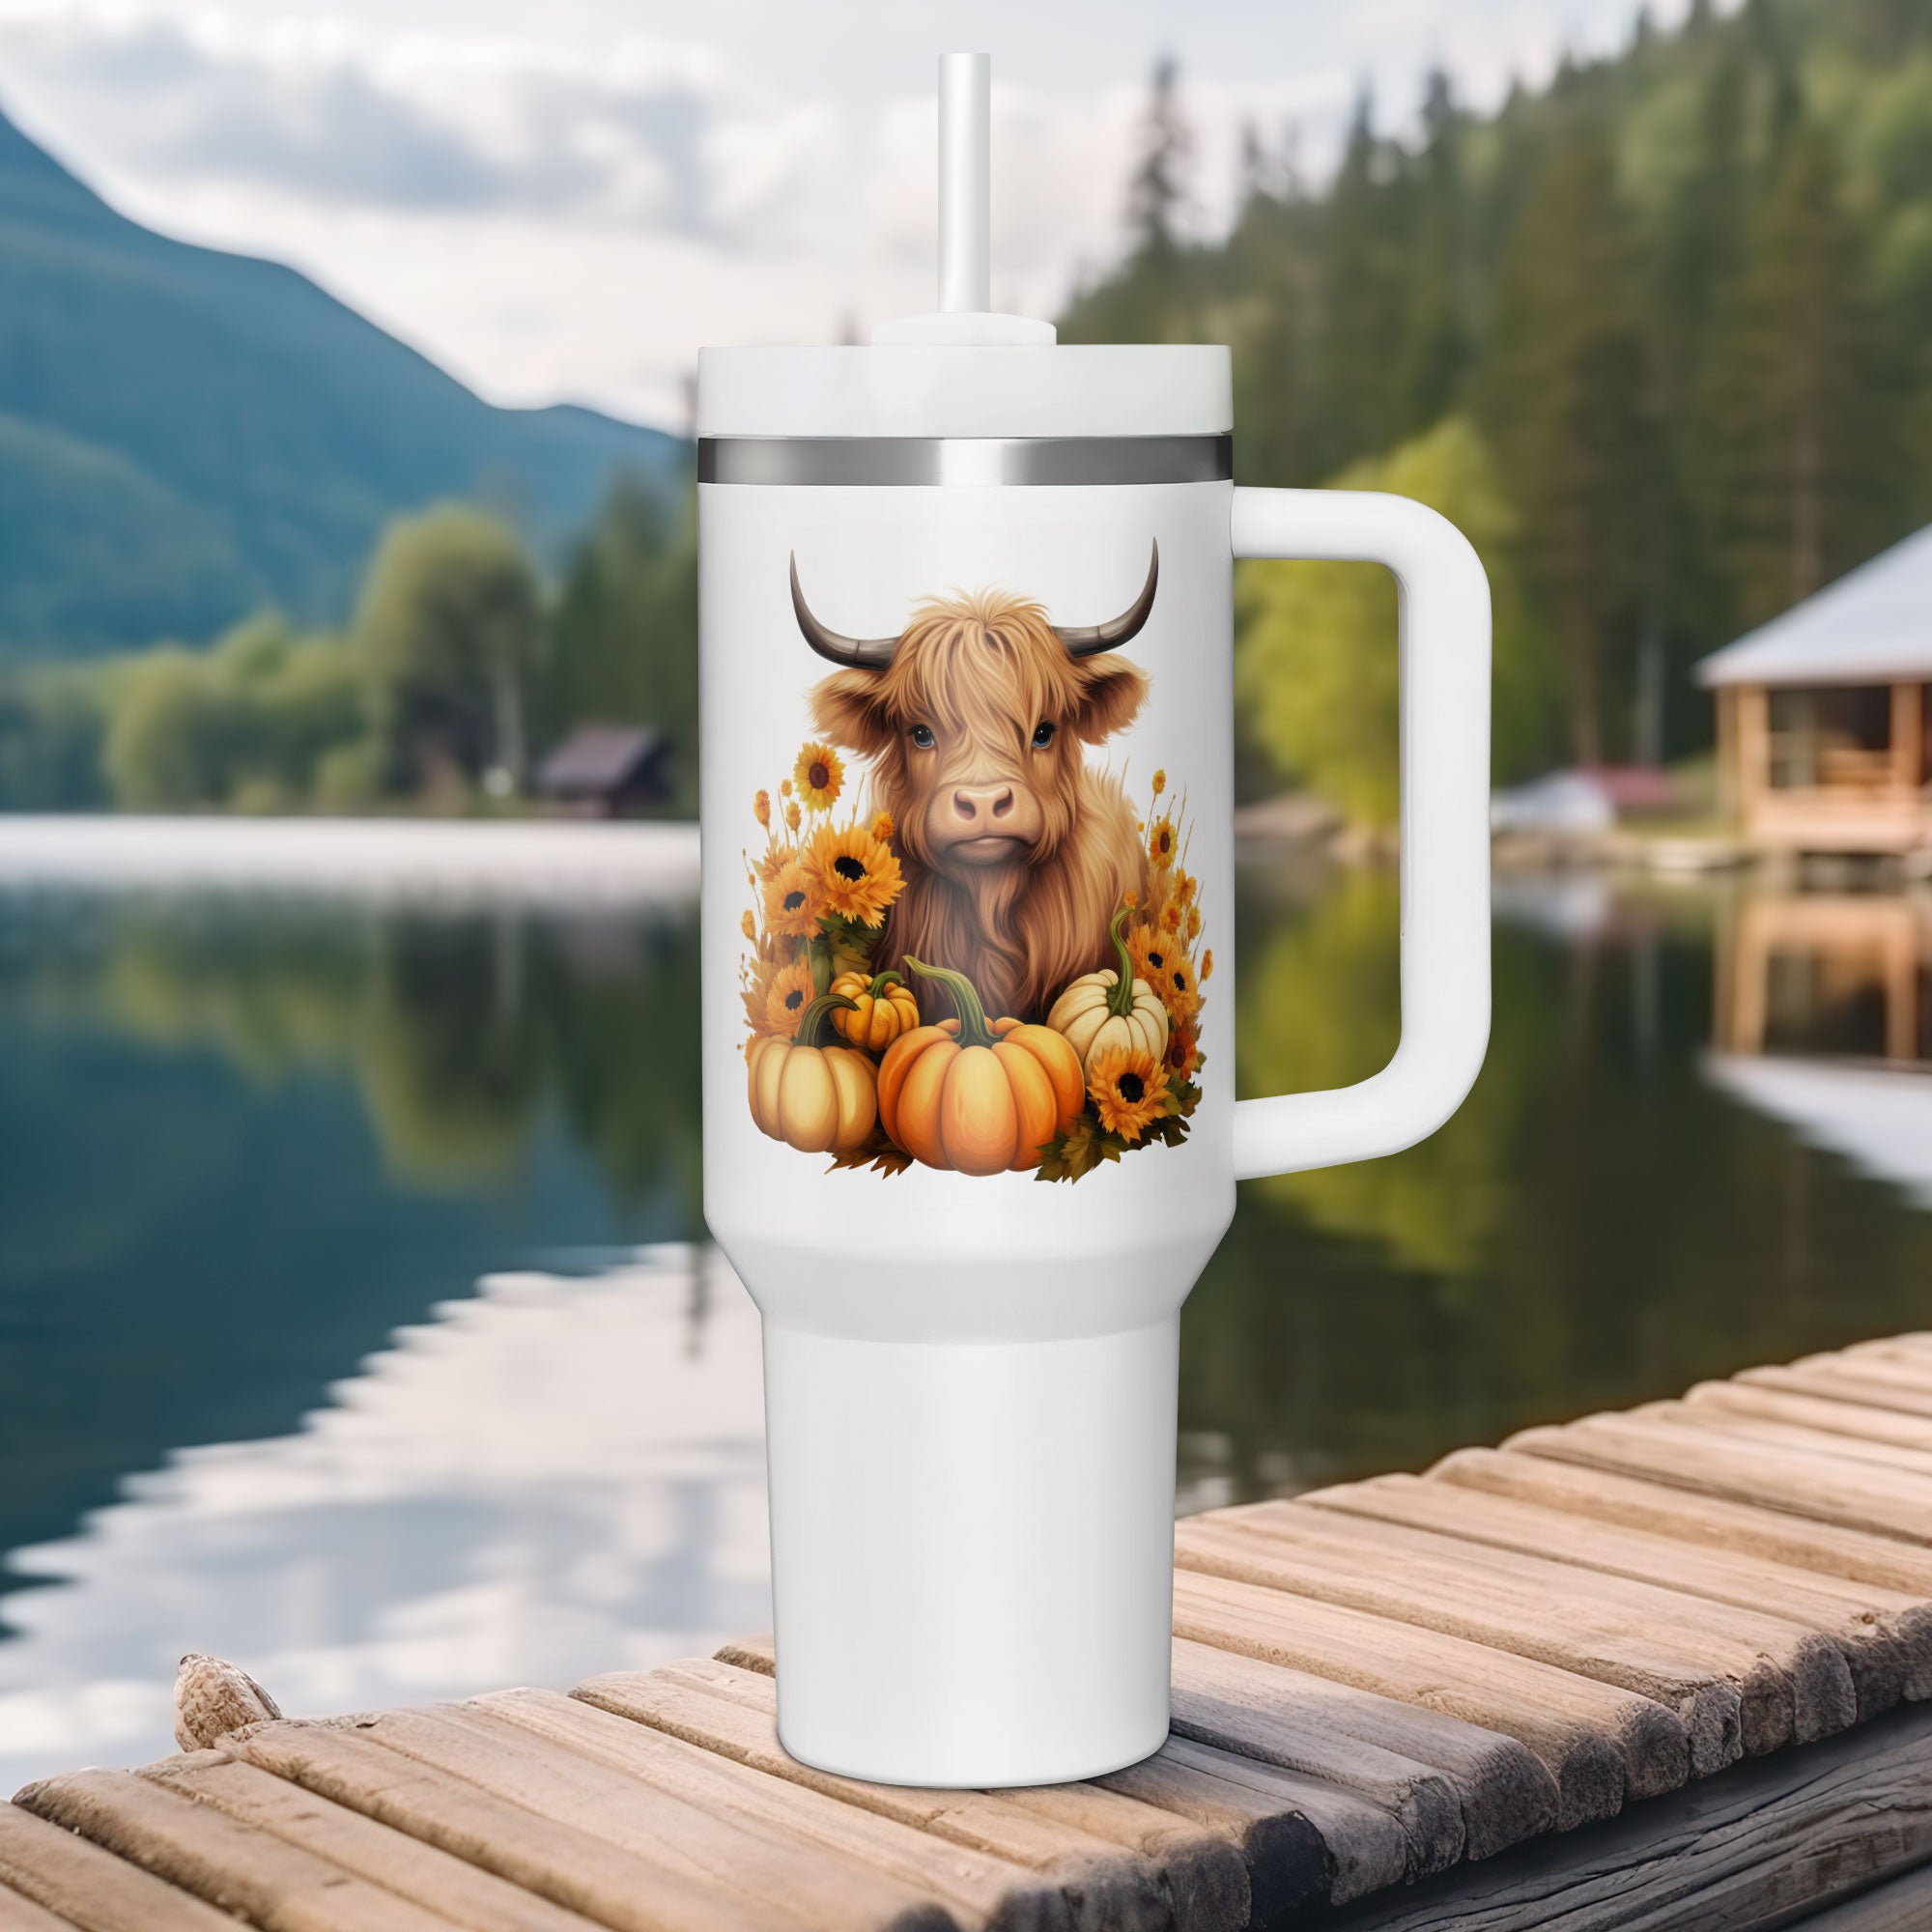 Christmas Highland Cow 40oz Tumbler with Handle, Lid, Straw, Laser